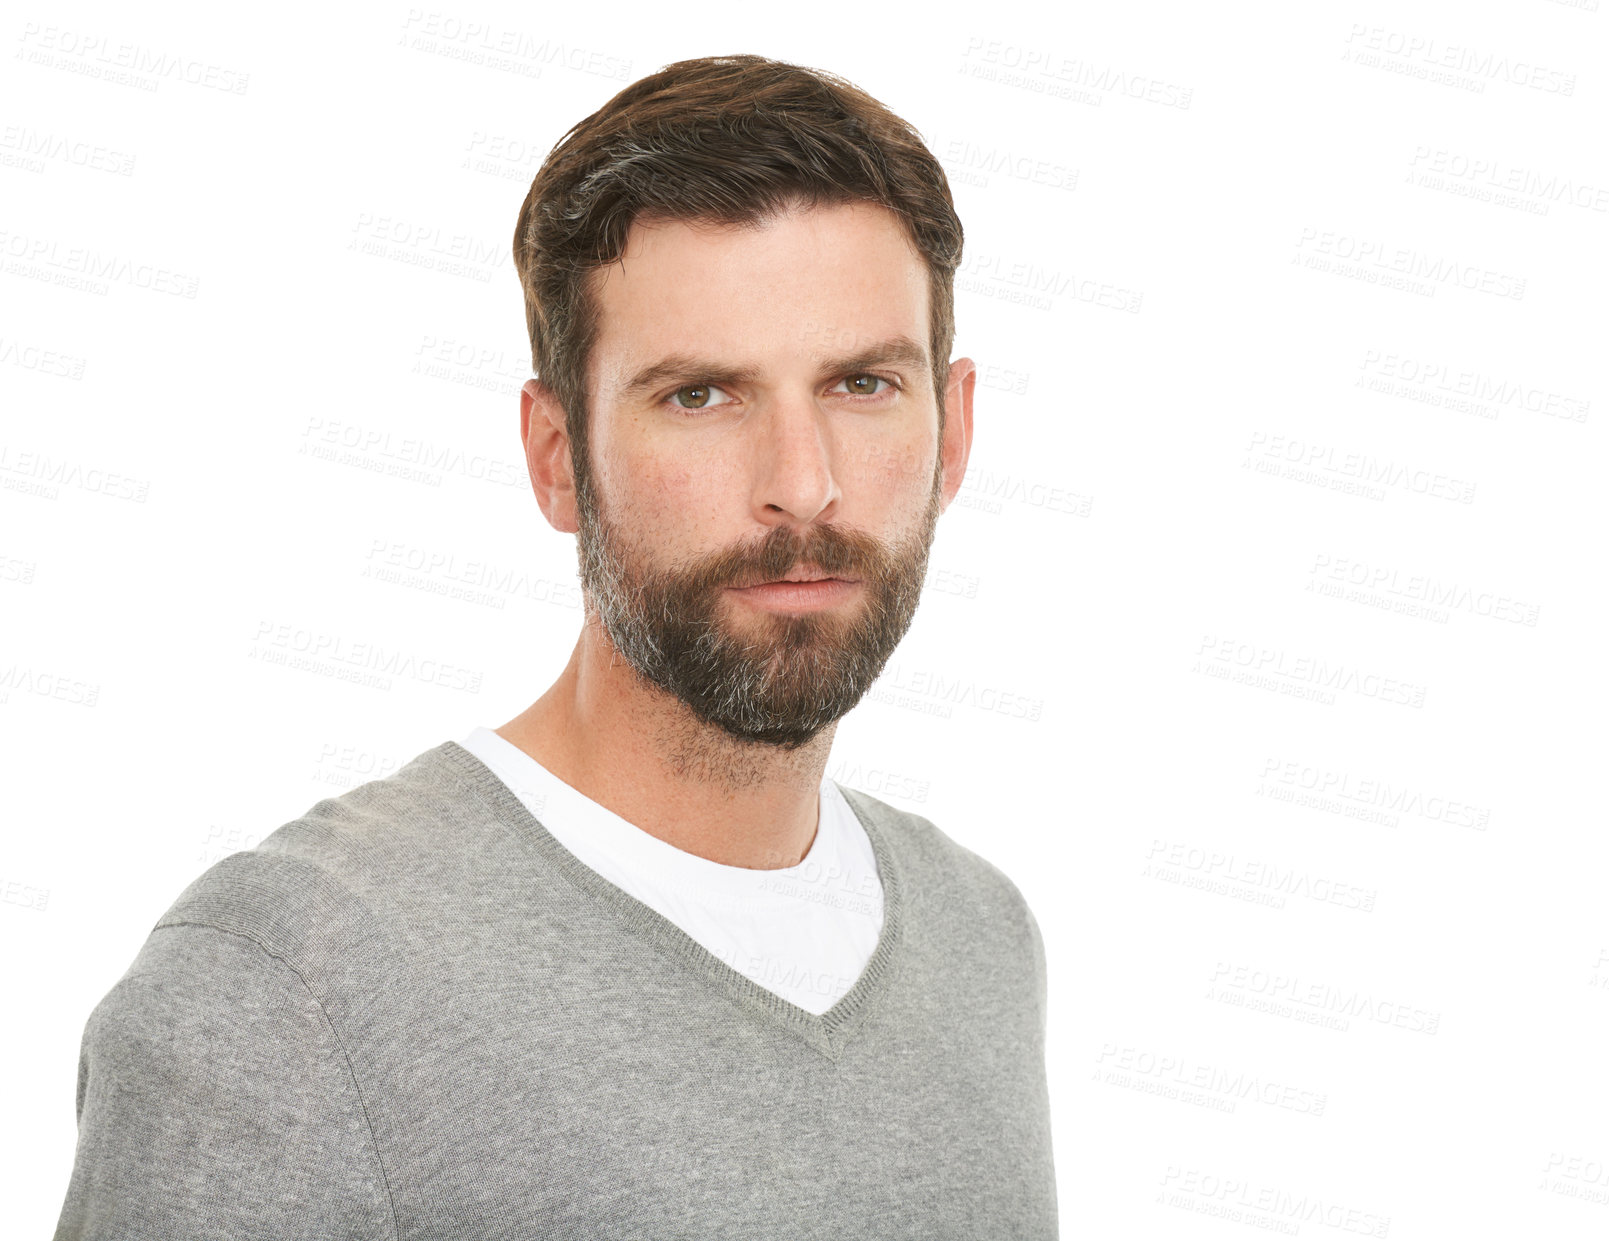 Buy stock photo Serious, portrait and man in studio with casual clothes for fashion in V neck pullover top, beard and headshot. Face of a young model or person from the USA with relaxed style on a white background